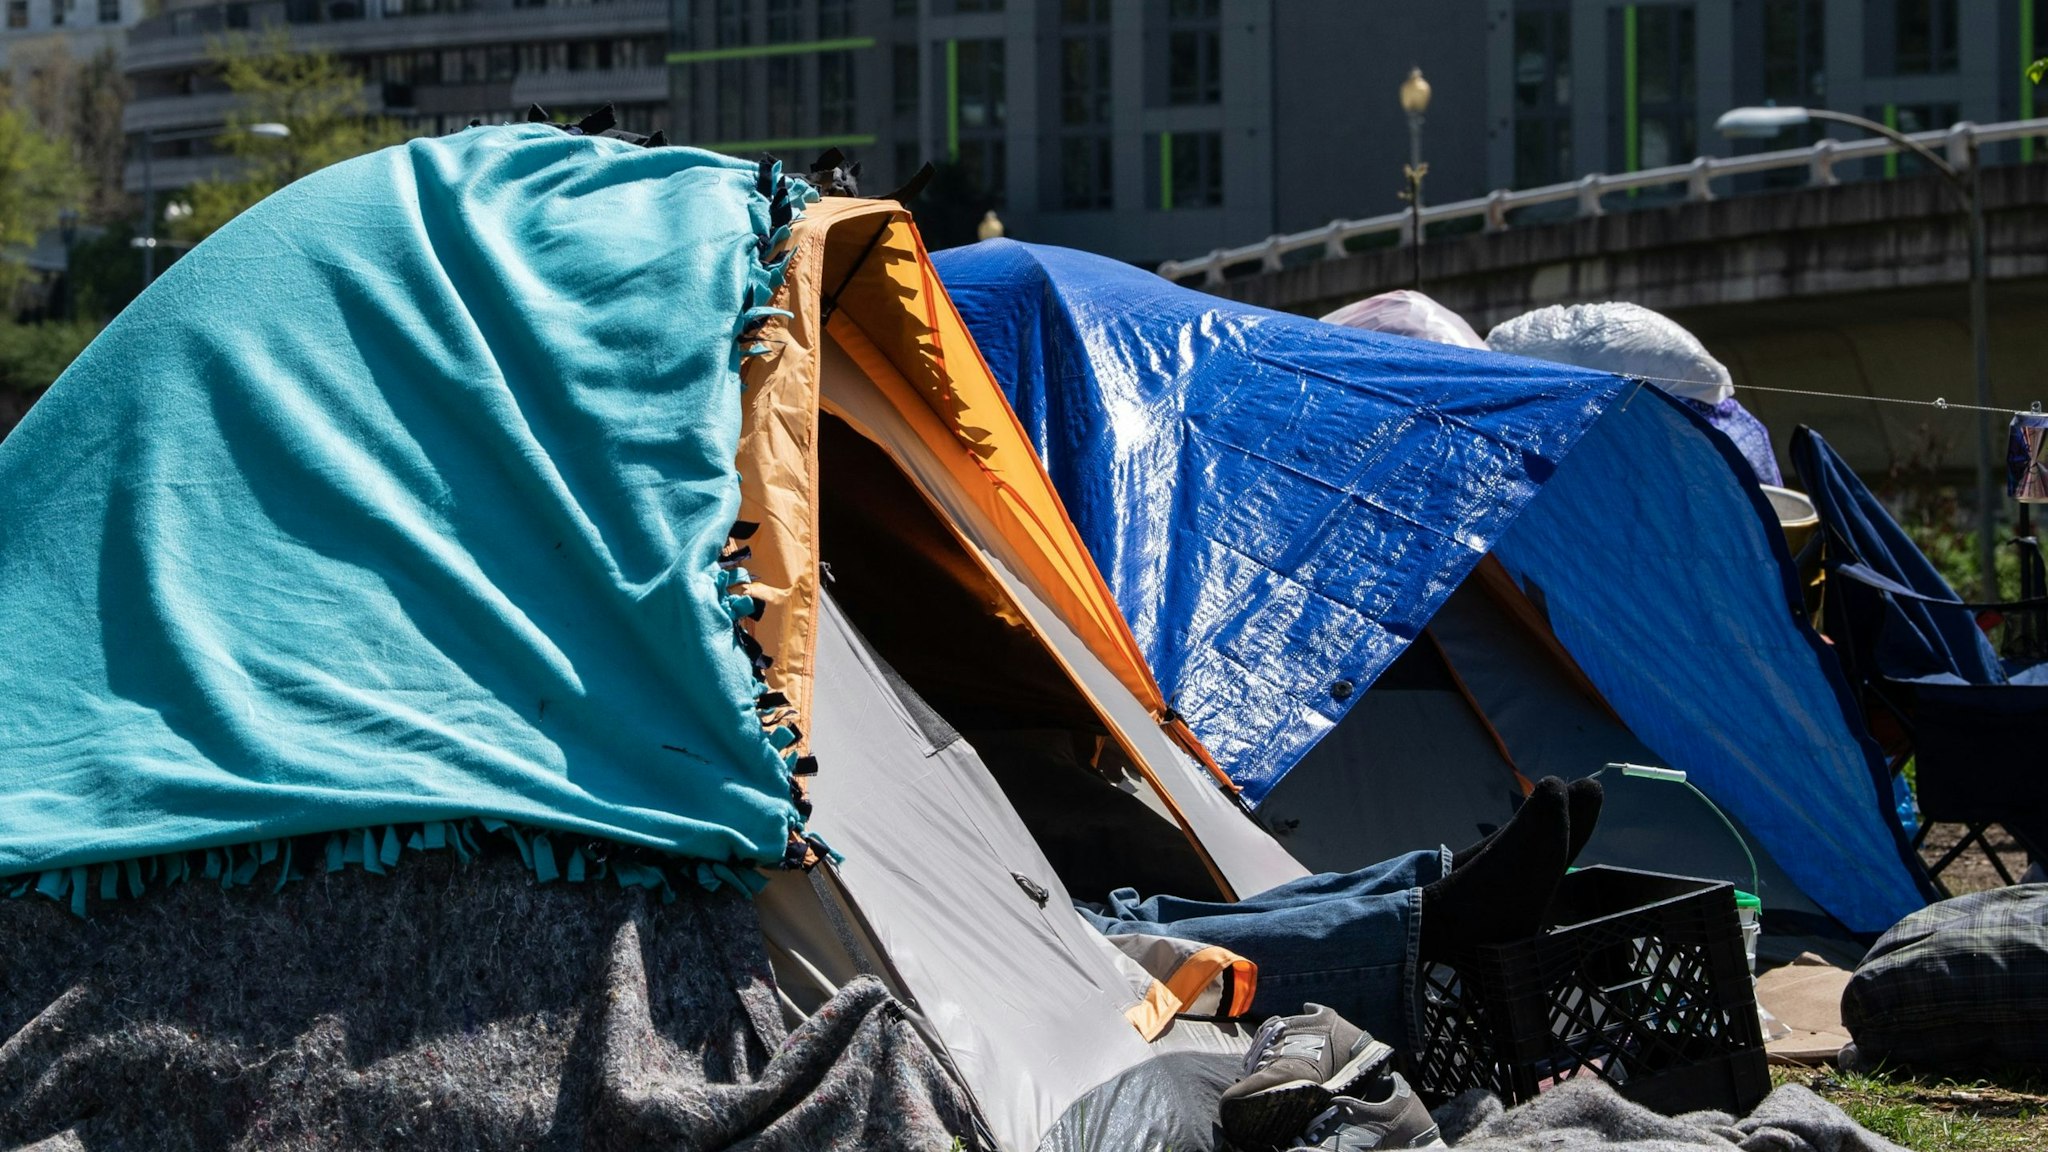 A homeless man rests in a tent in an encampment of homeless people in Washington, DC, on April 8, 2020. - The COVID-19 death toll in the US leapt to more than 15,000 Thursday, according to a running tally by Johns Hopkins University, from well over 400,000 confirmed cases.Meanwhile unemployment is rising at a jarring rate, with data Thursday showing 17 million have lost their jobs since mid-March, when America began shutting down. (Photo by NICHOLAS KAMM / AFP) (Photo by NICHOLAS KAMM/AFP via Getty Images)